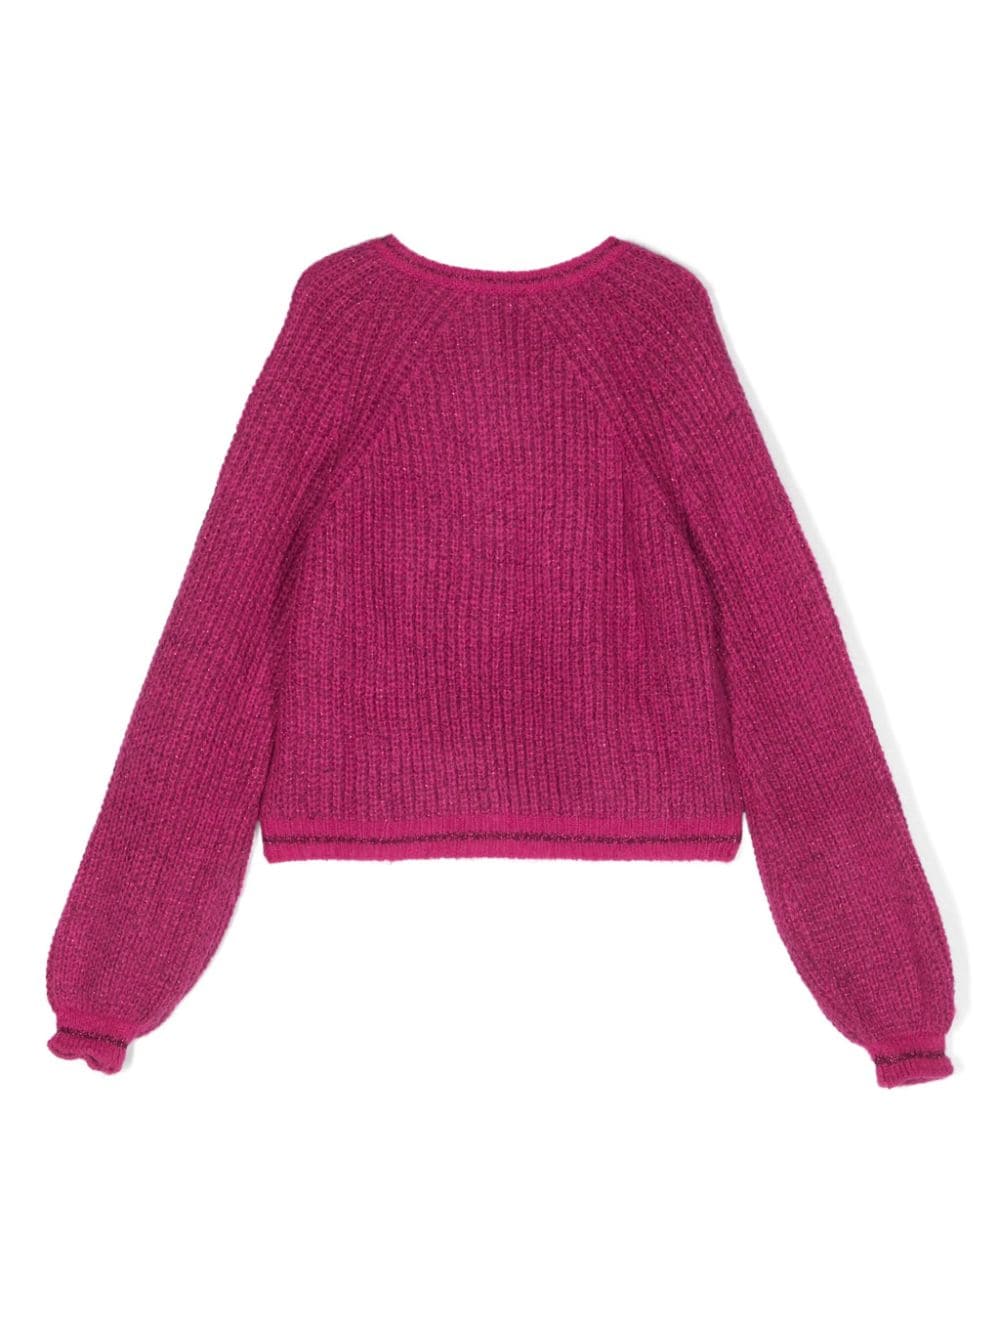 Pink sweater for girls